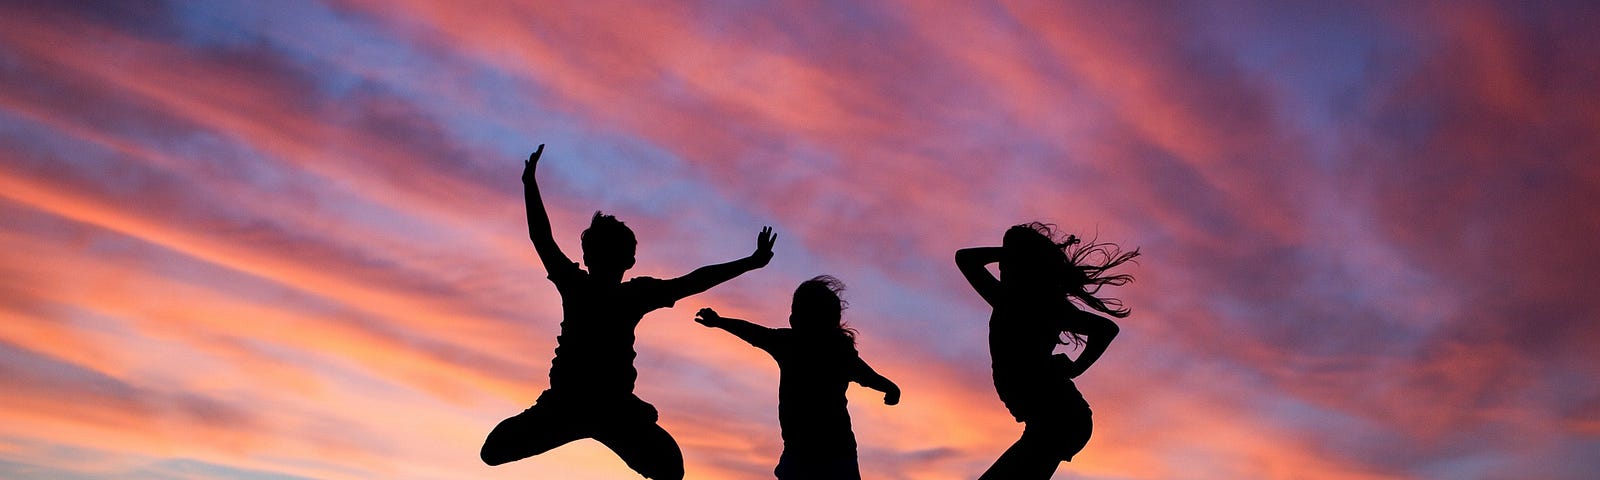 A group of three people jumping agains the sunset